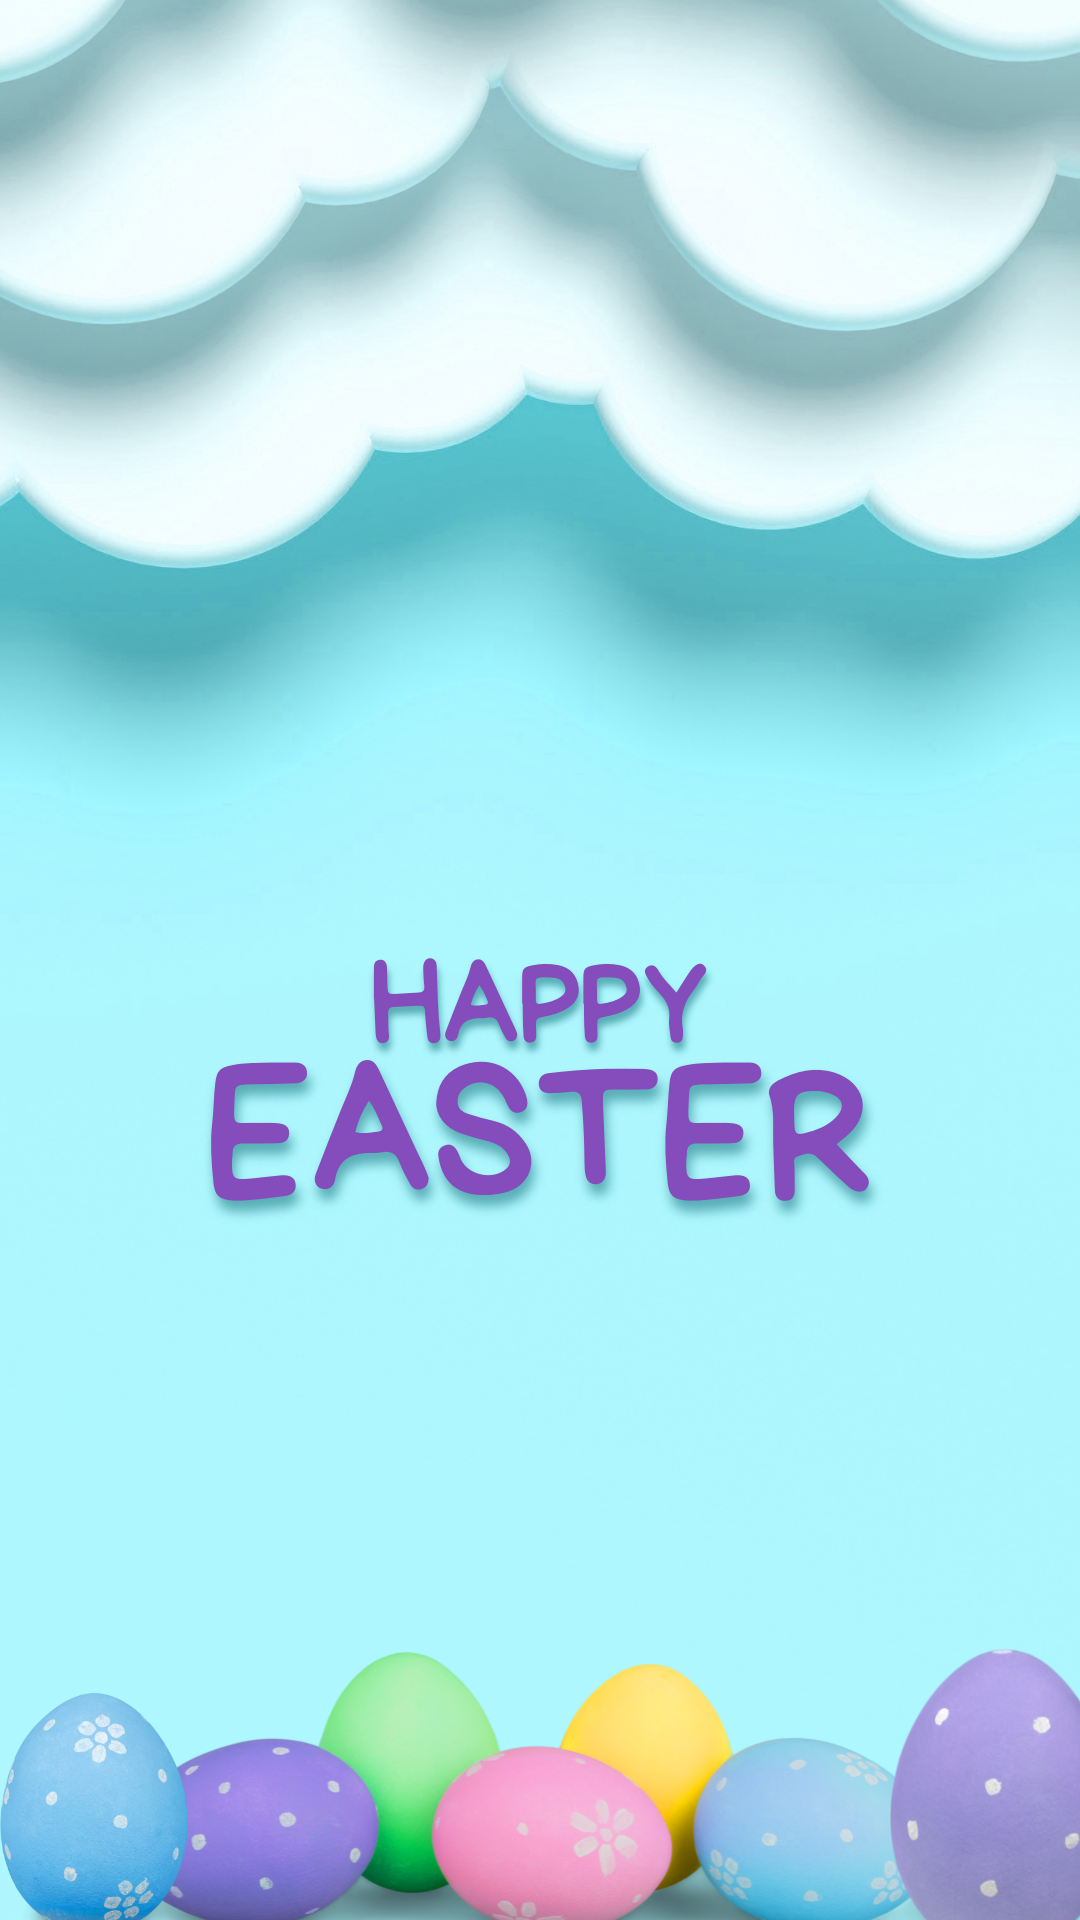 happy easter day